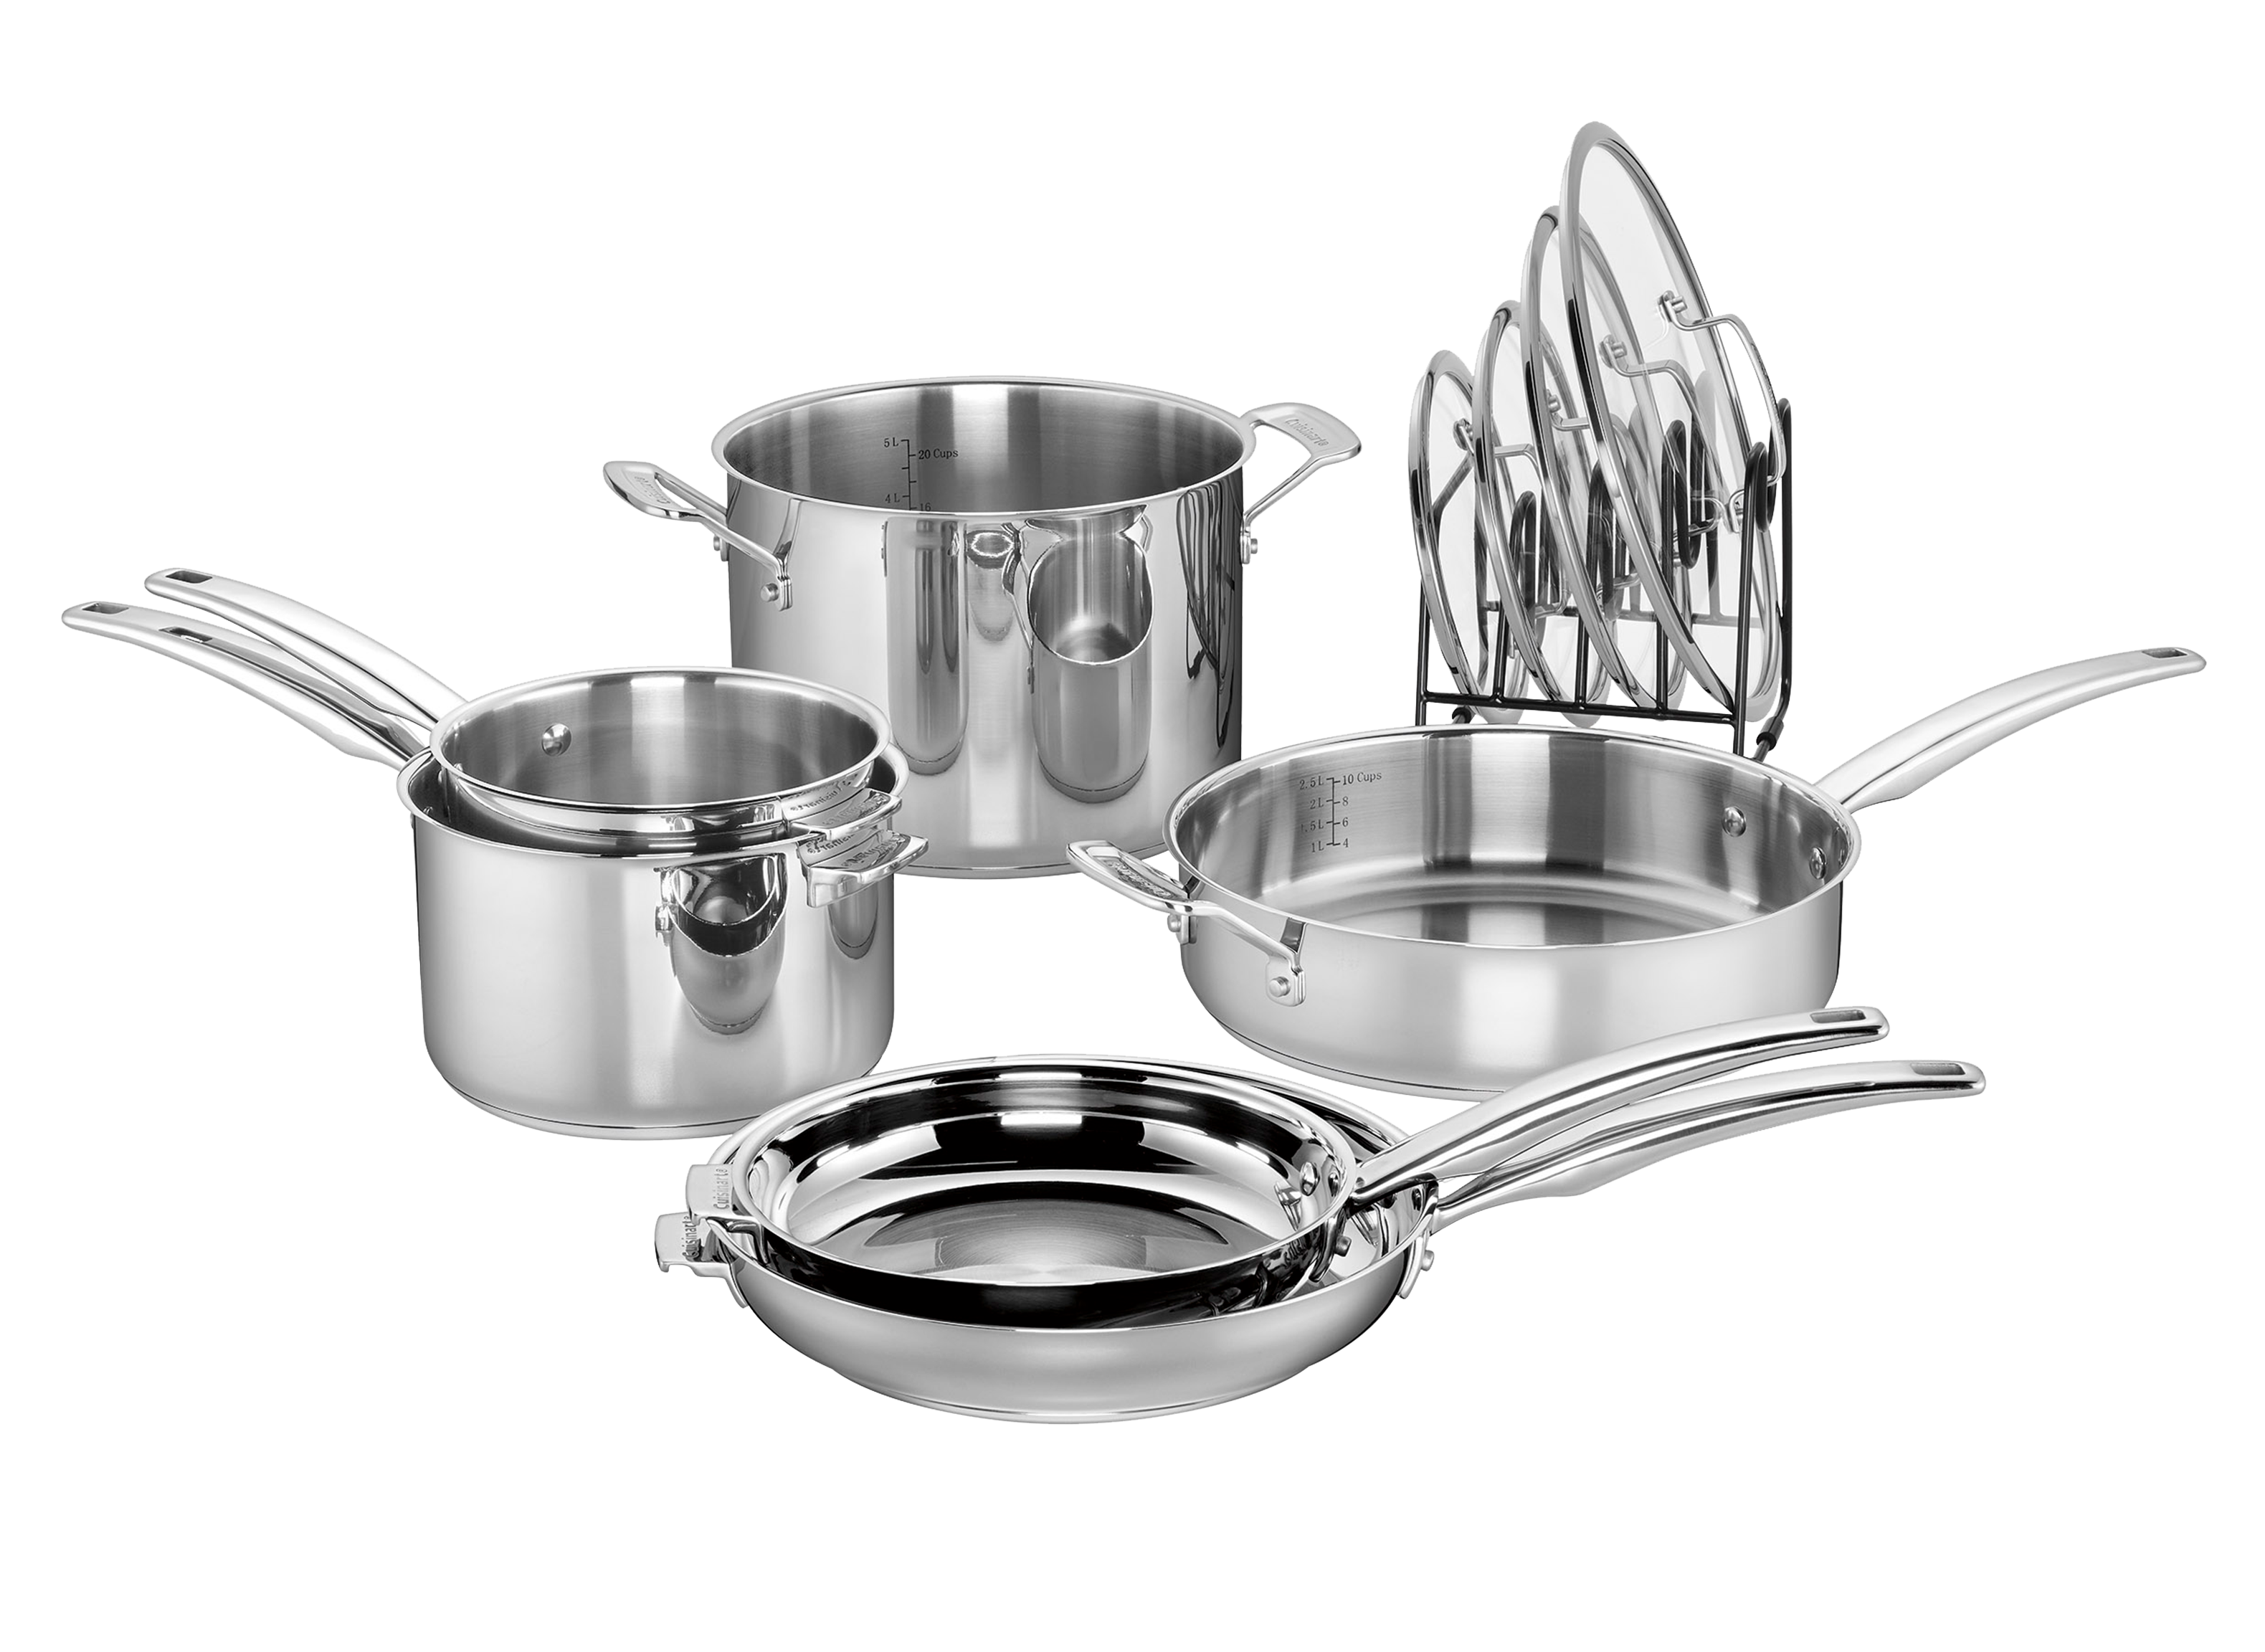 https://crdms.images.consumerreports.org/prod/products/cr/models/407656-cookware-sets-stainless-steel-cuisinart-n91-11-smartnest-10032181.png